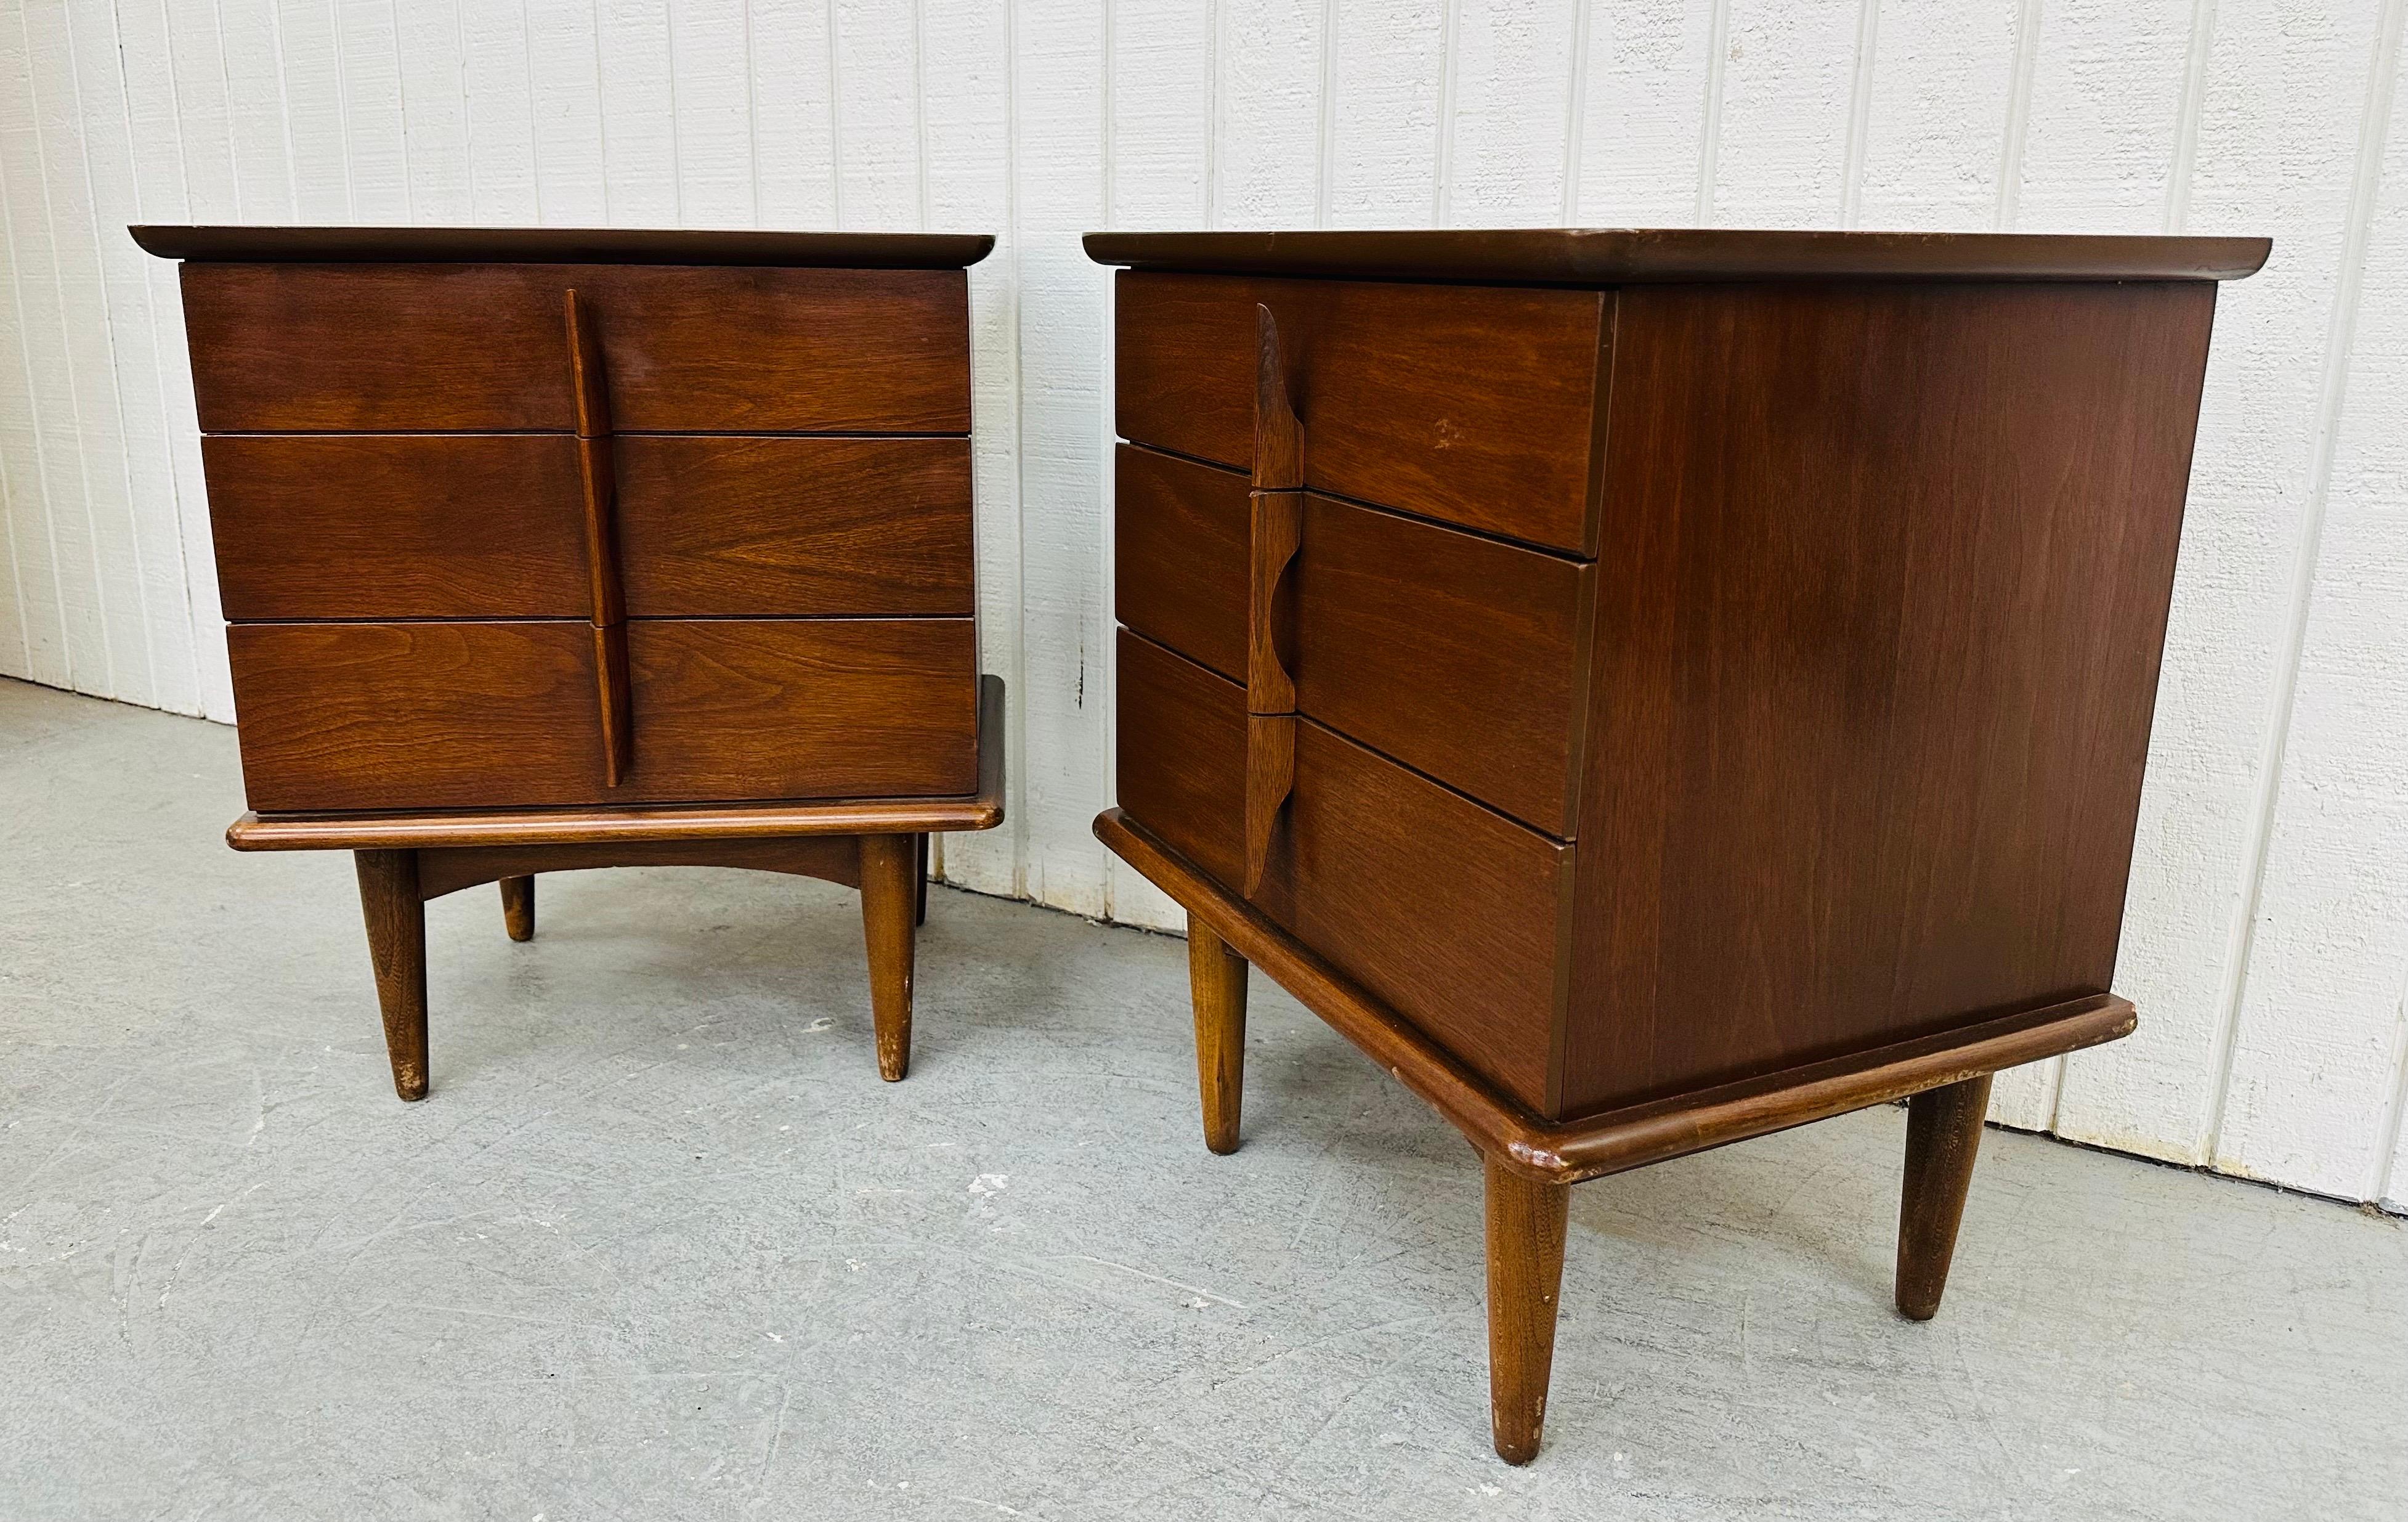 This listing is for a pair of Mid-Century Modern United Furniture Walnut Nightstands. Featuring a straight line design, three drawers for storage, sculpted wooden pulls, modern legs, and a beautiful walnut finish. This is an exceptional combination